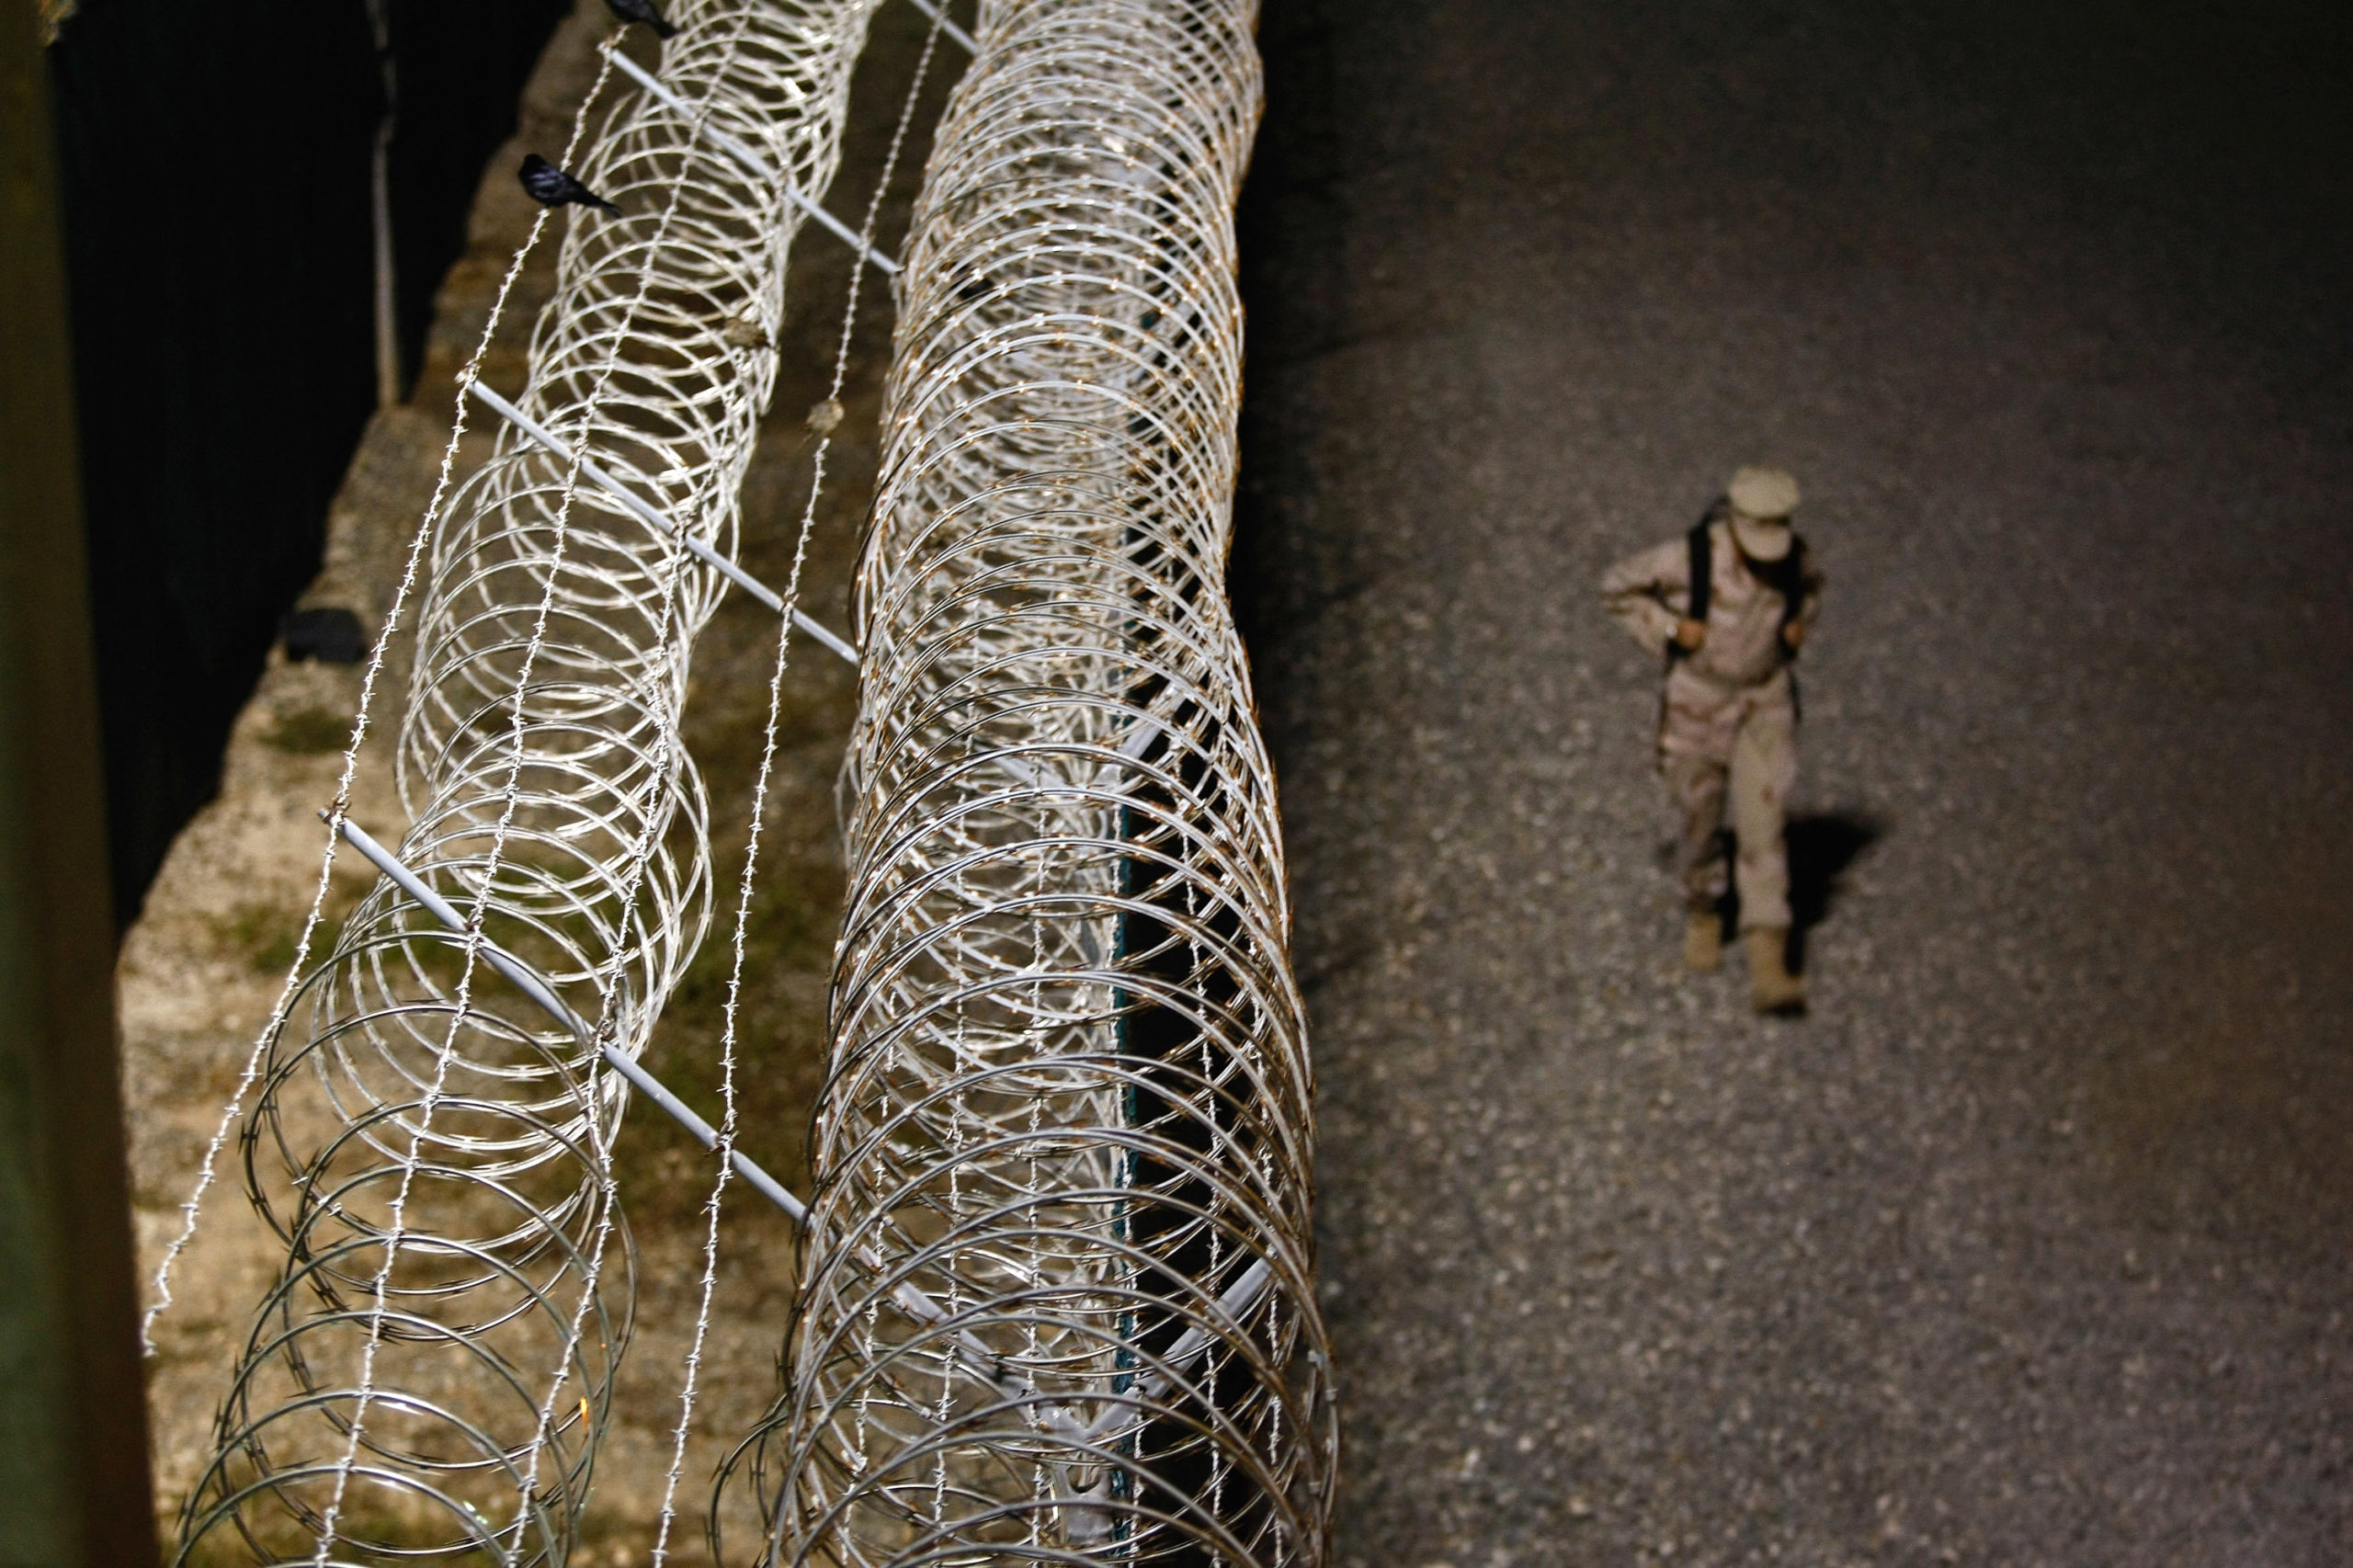 A soldier outside Guantanamo Bay (Photo by John Moore/Getty Images)